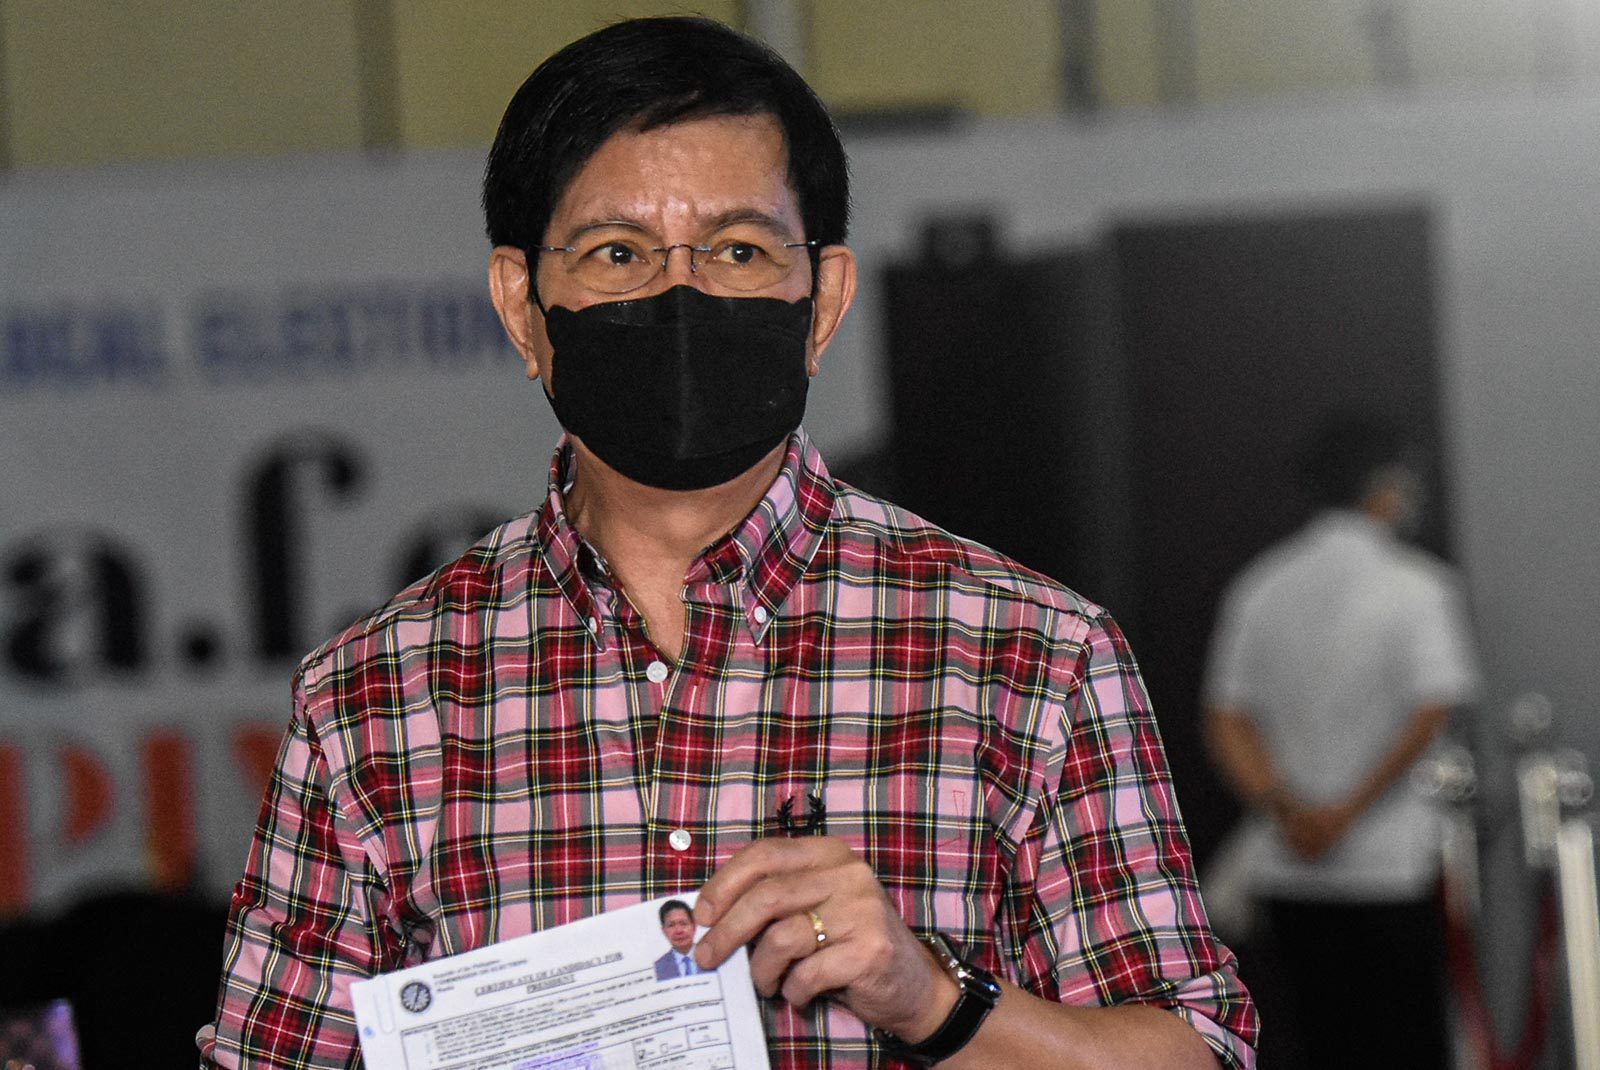 One more chance: Panfilo Lacson runs for president again